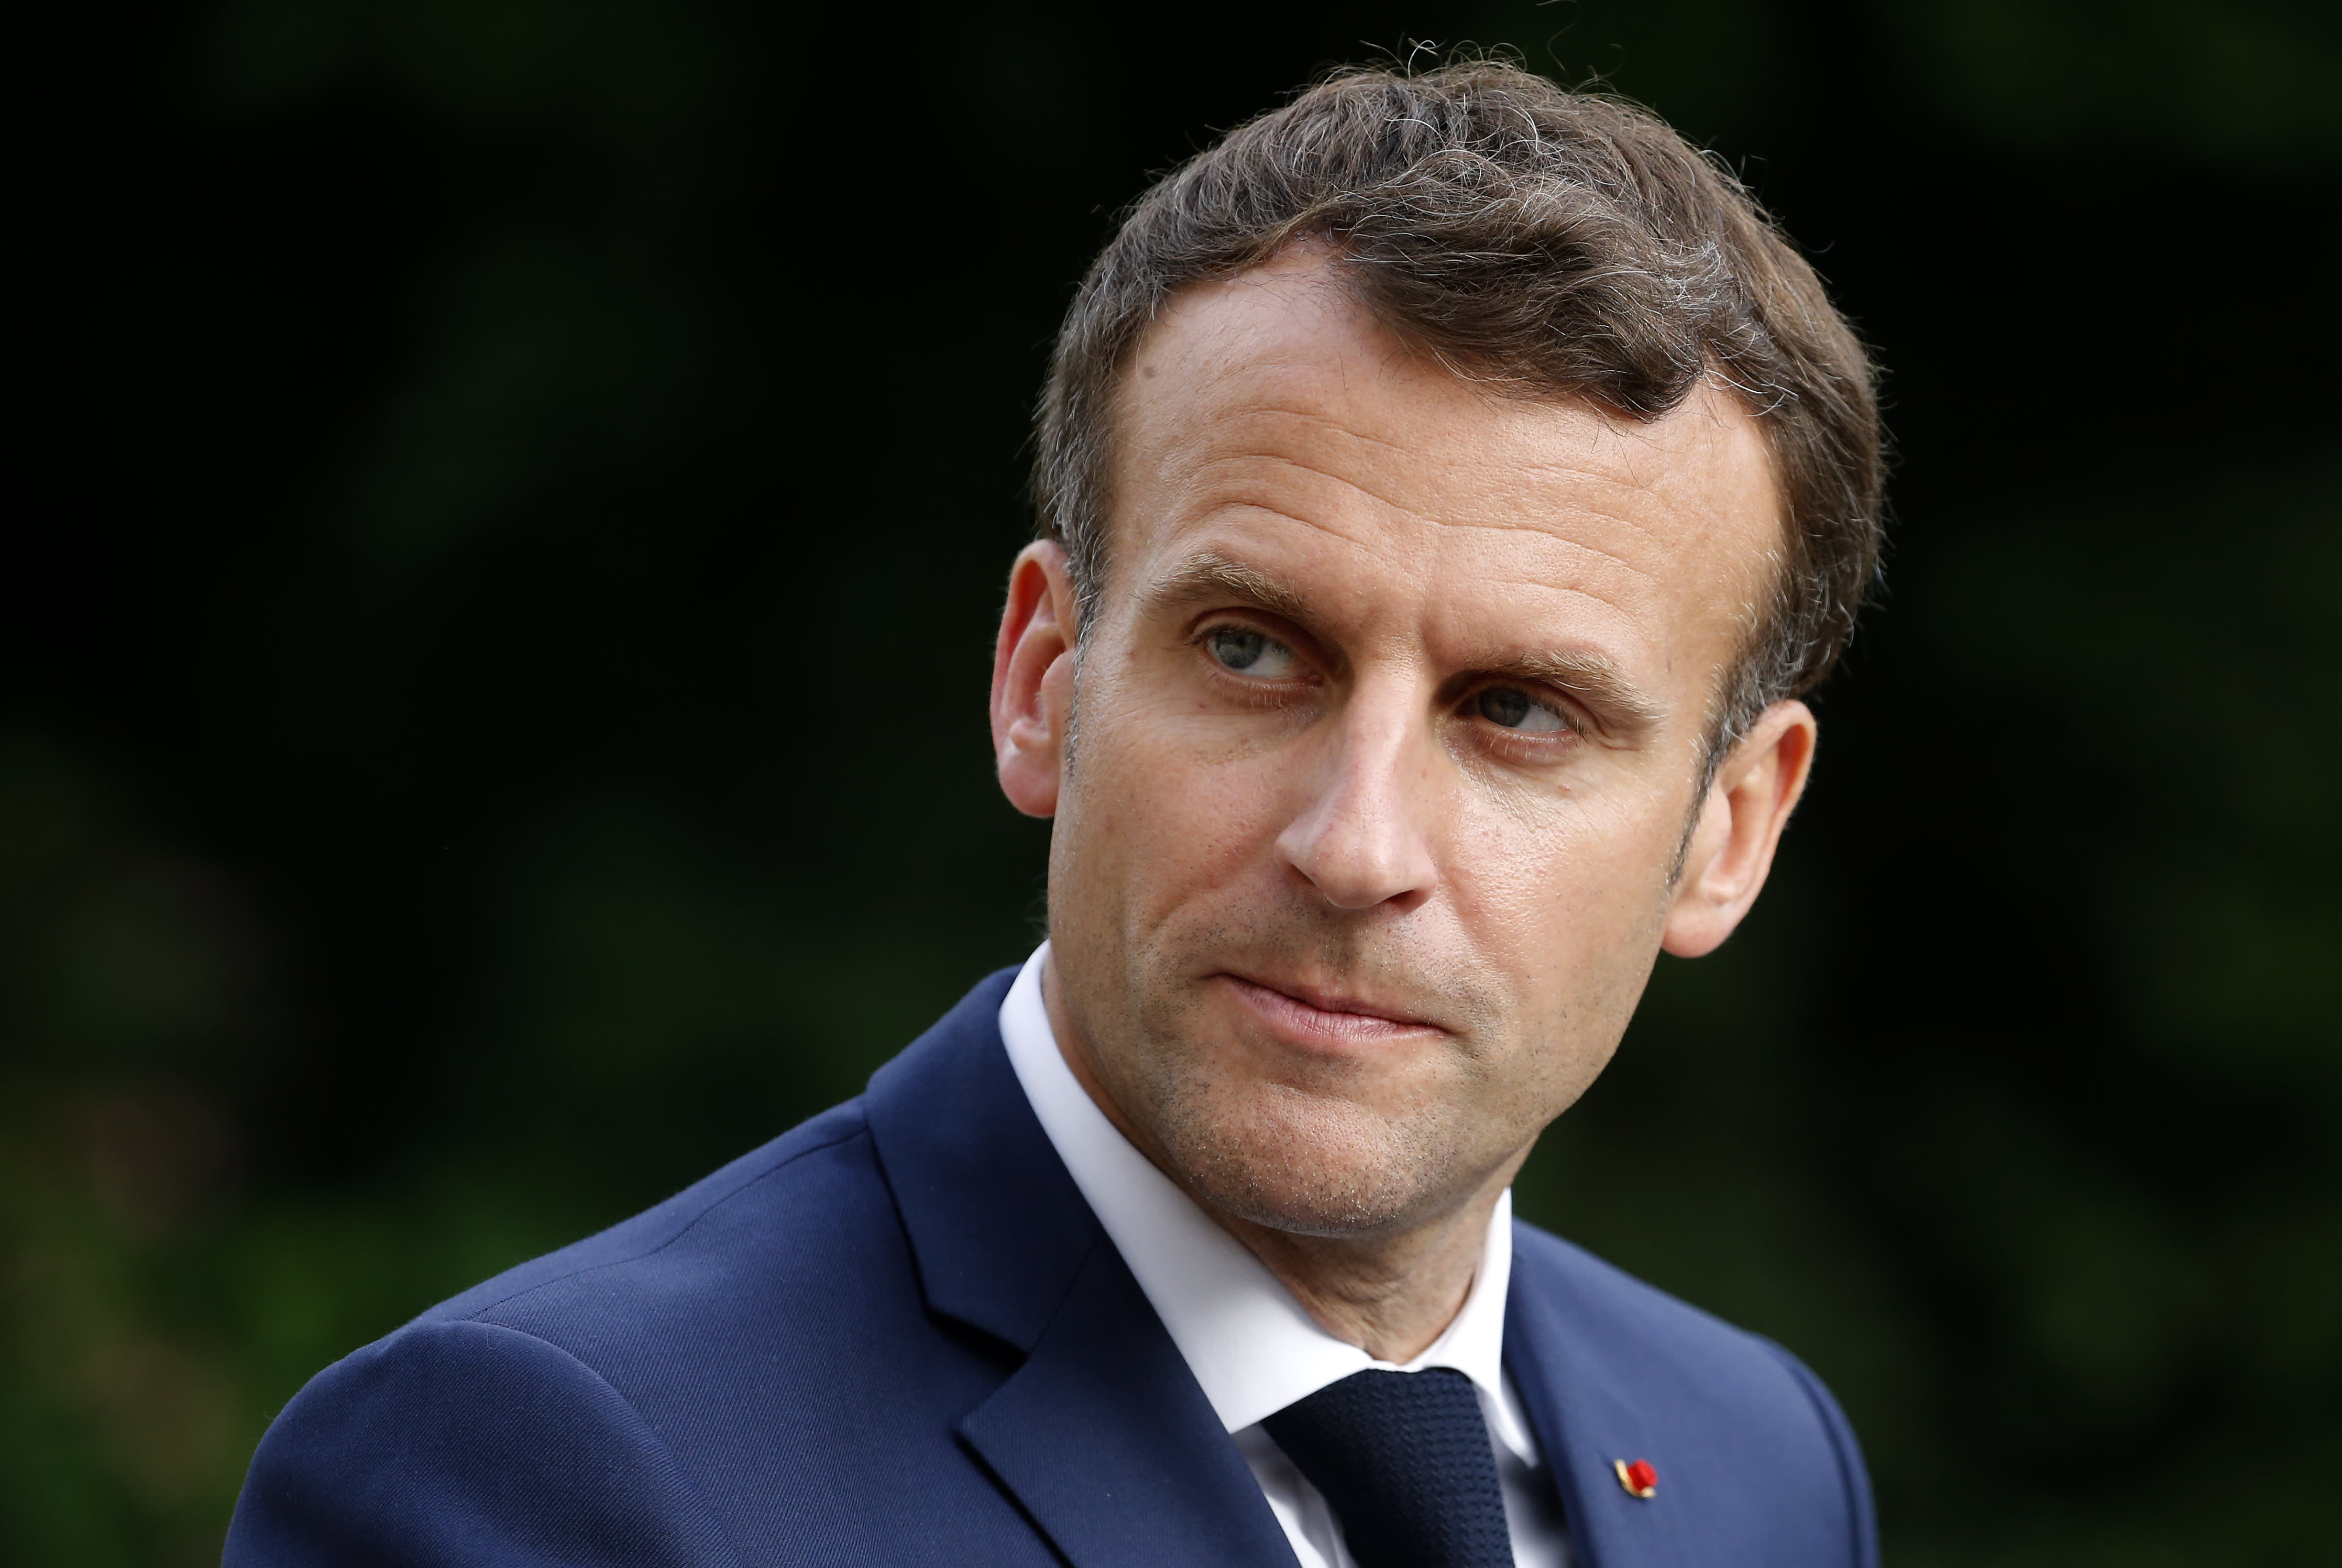 France has one of the lowest retirement ages in the world. And thats a big headache for Macron